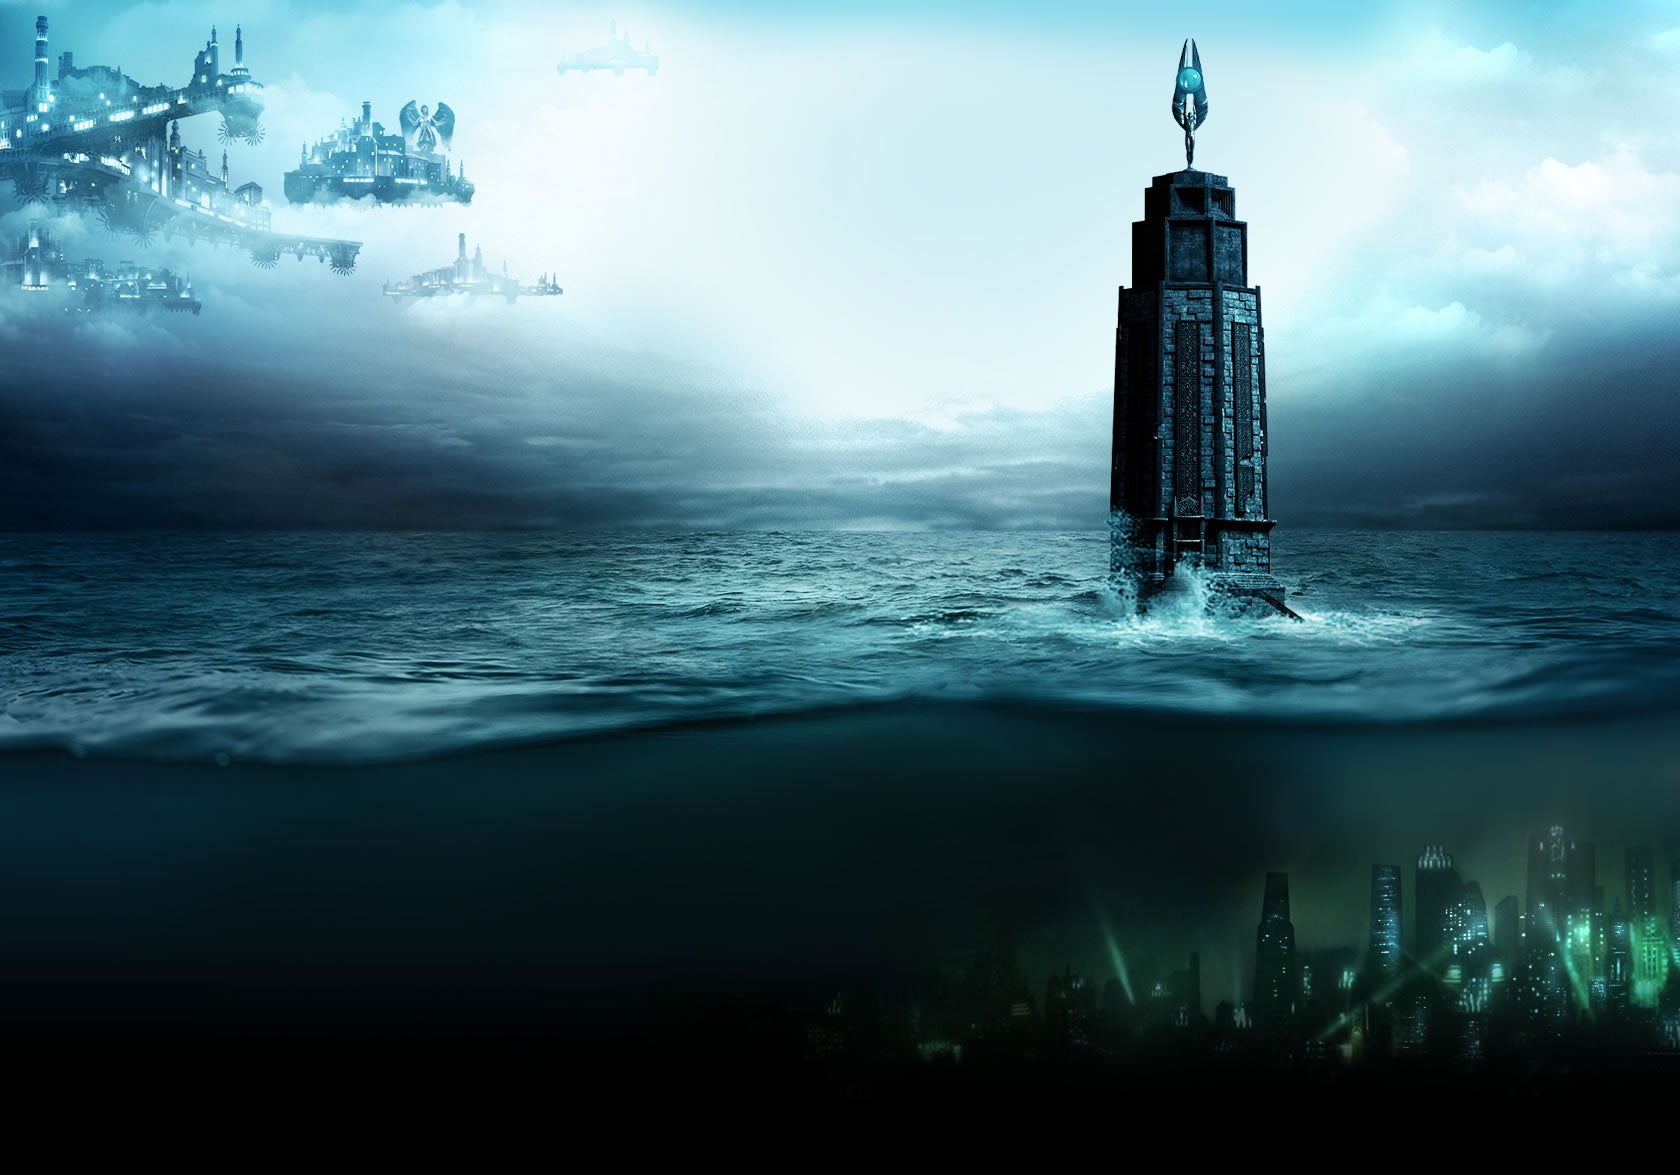 Image for BioShock: The Collection - info on how to upgrade your copy on Steam, and specs detailed